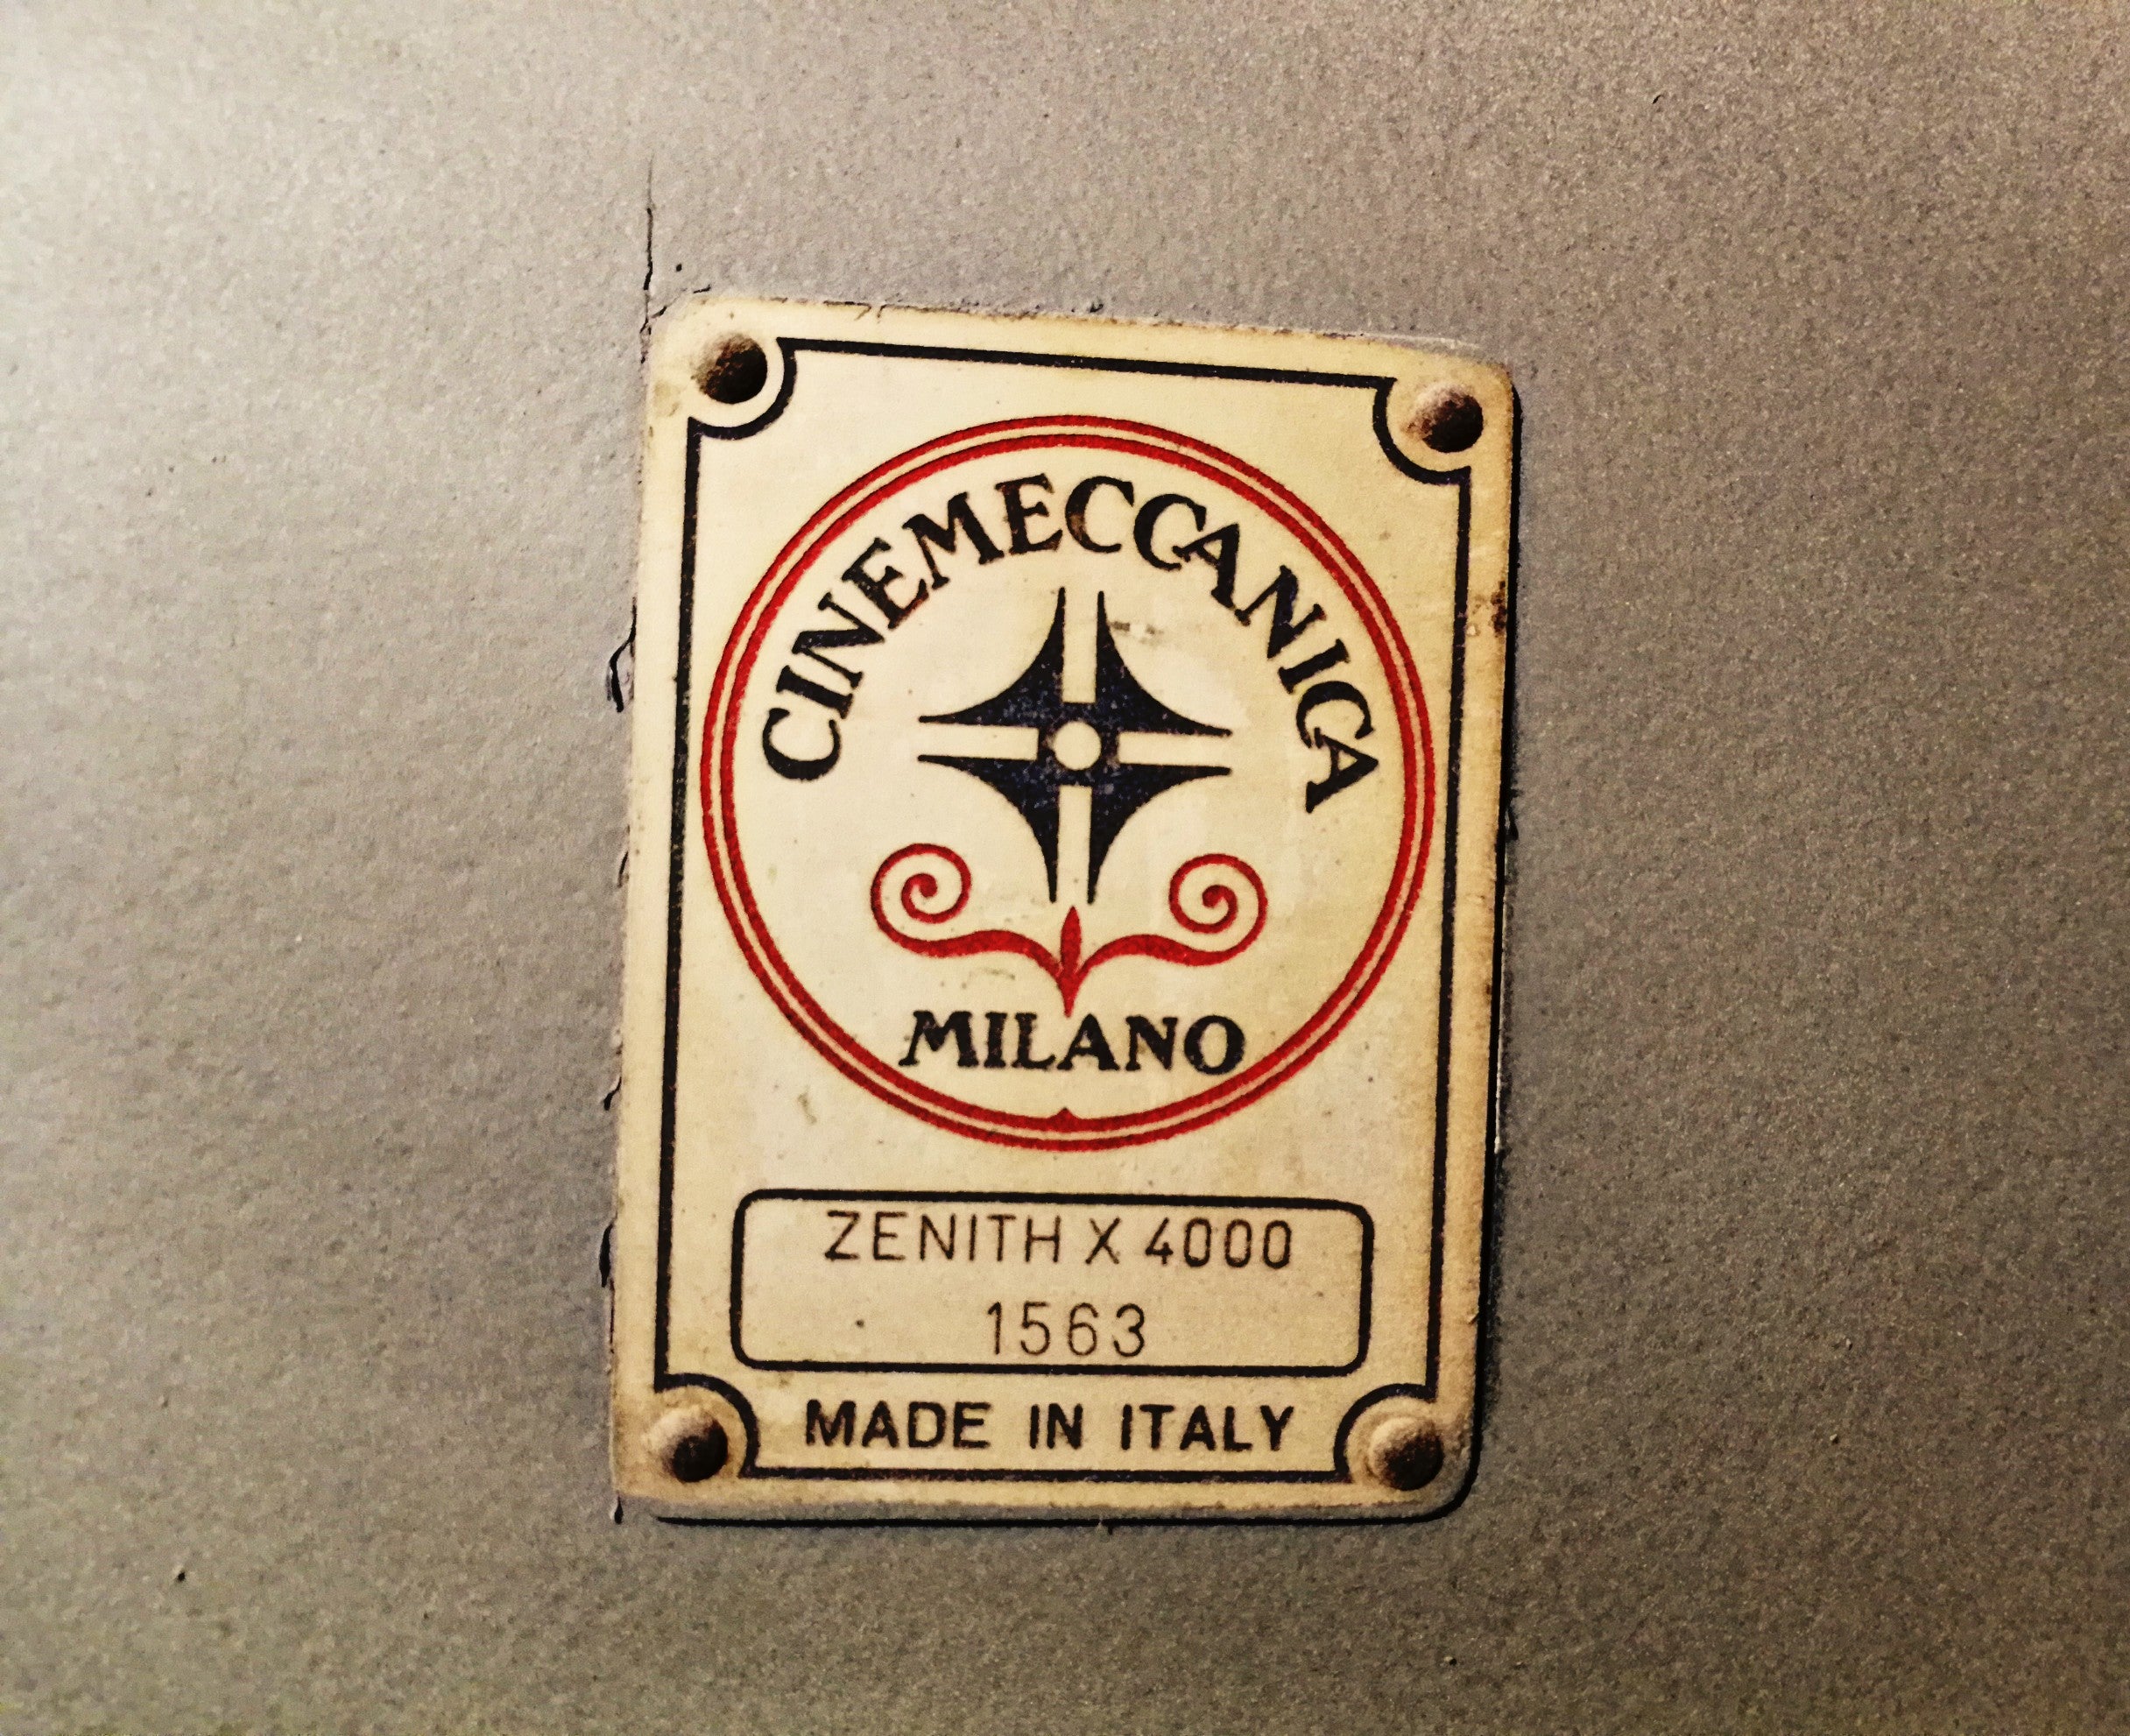 Robyn Cimeccanica Milano film projector close up view of Cinemeccanica Milano plate by Stadl Art